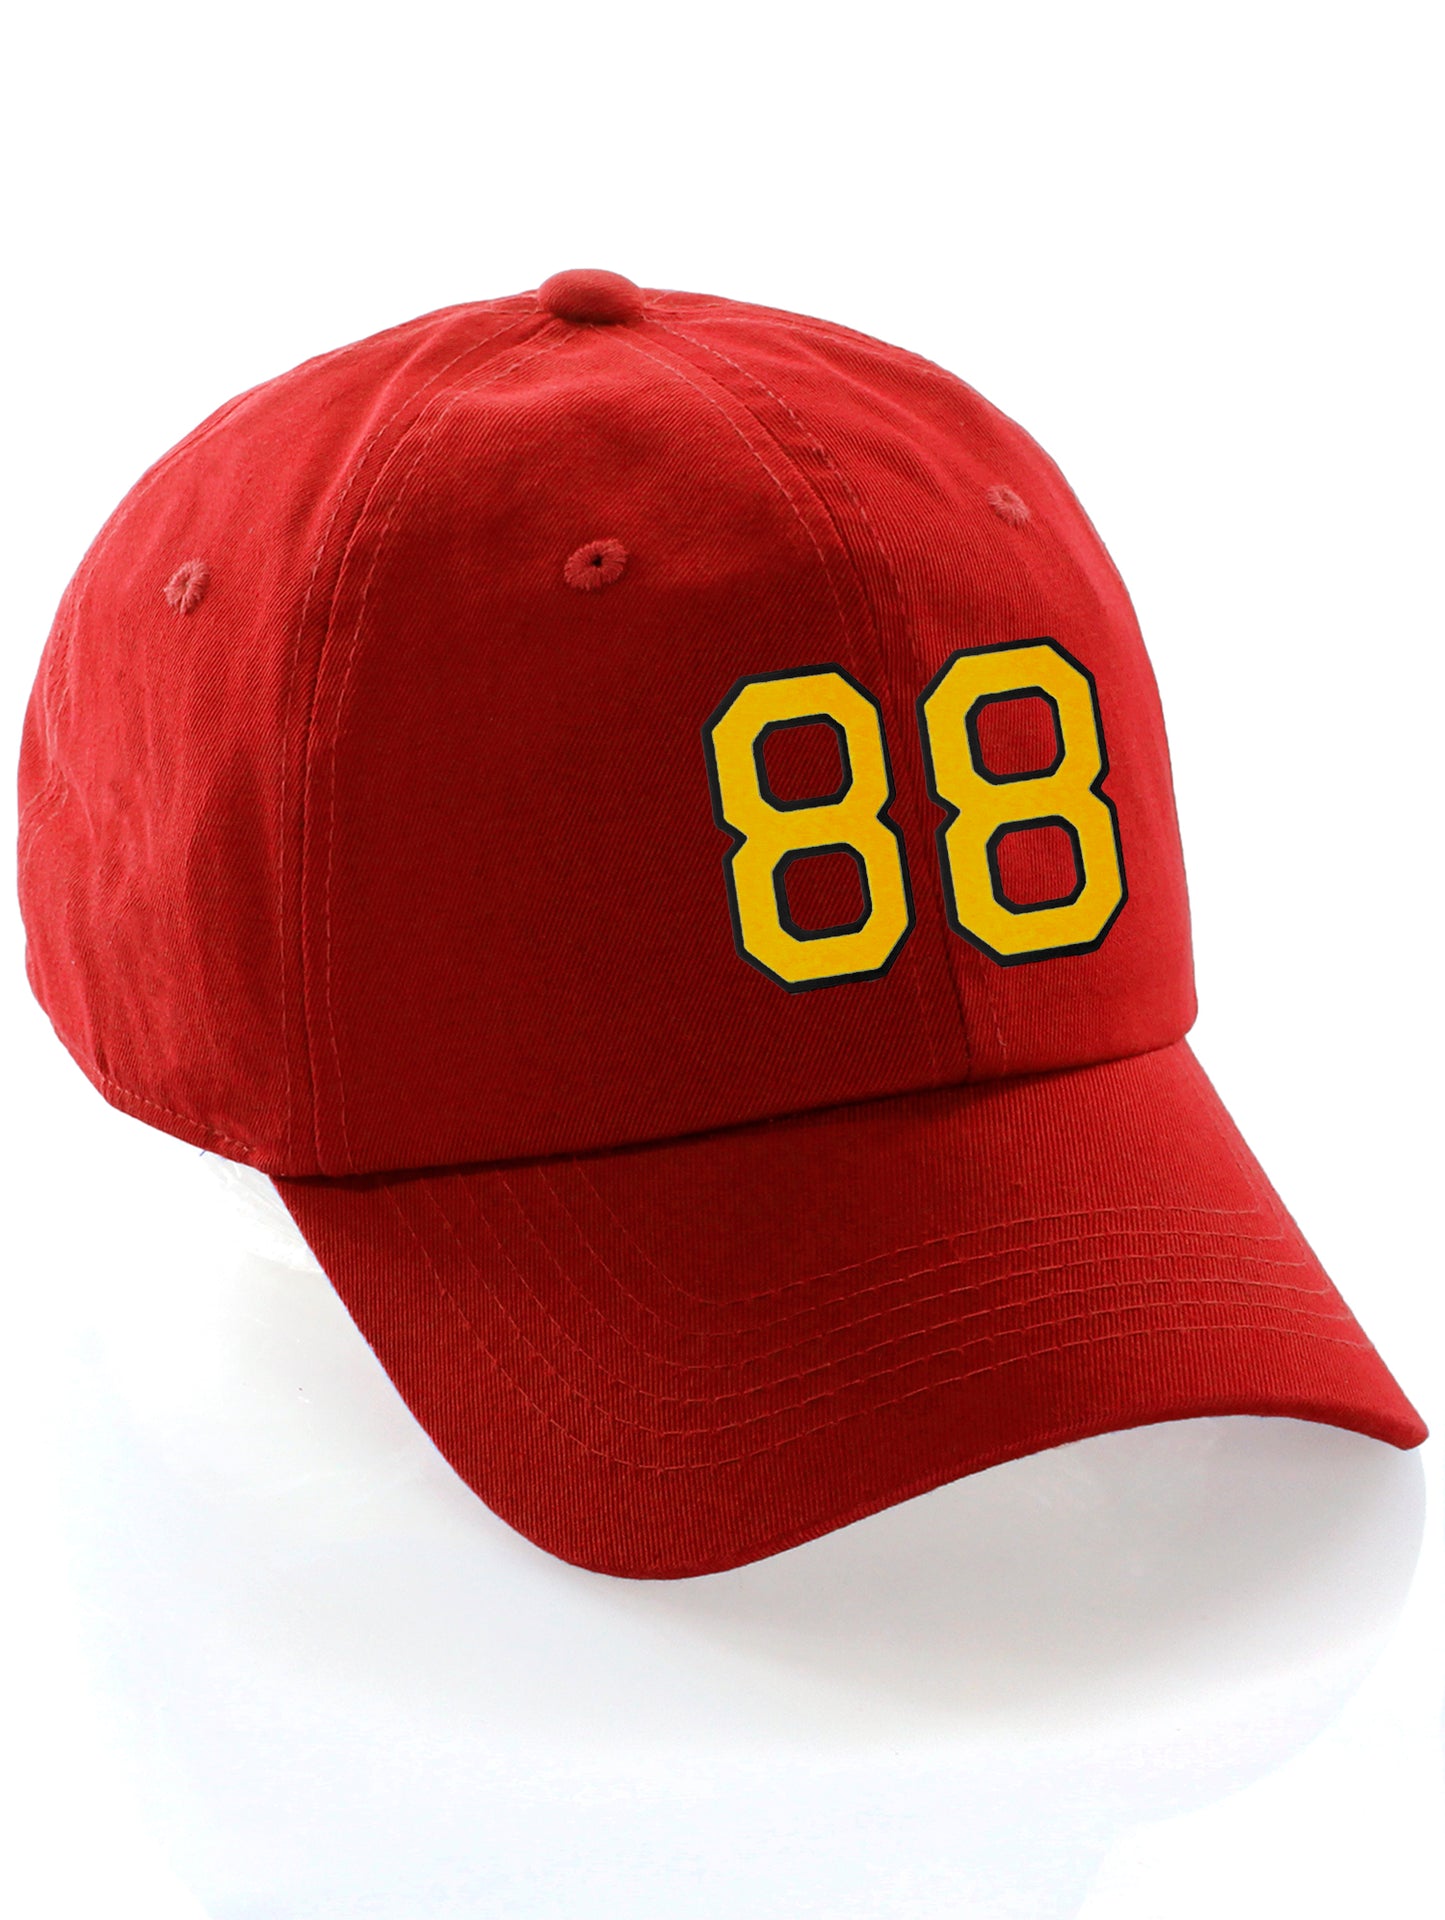 Customized Number Hat 00 to 99 Team Colors Baseball Cap, Red hat Black Gold